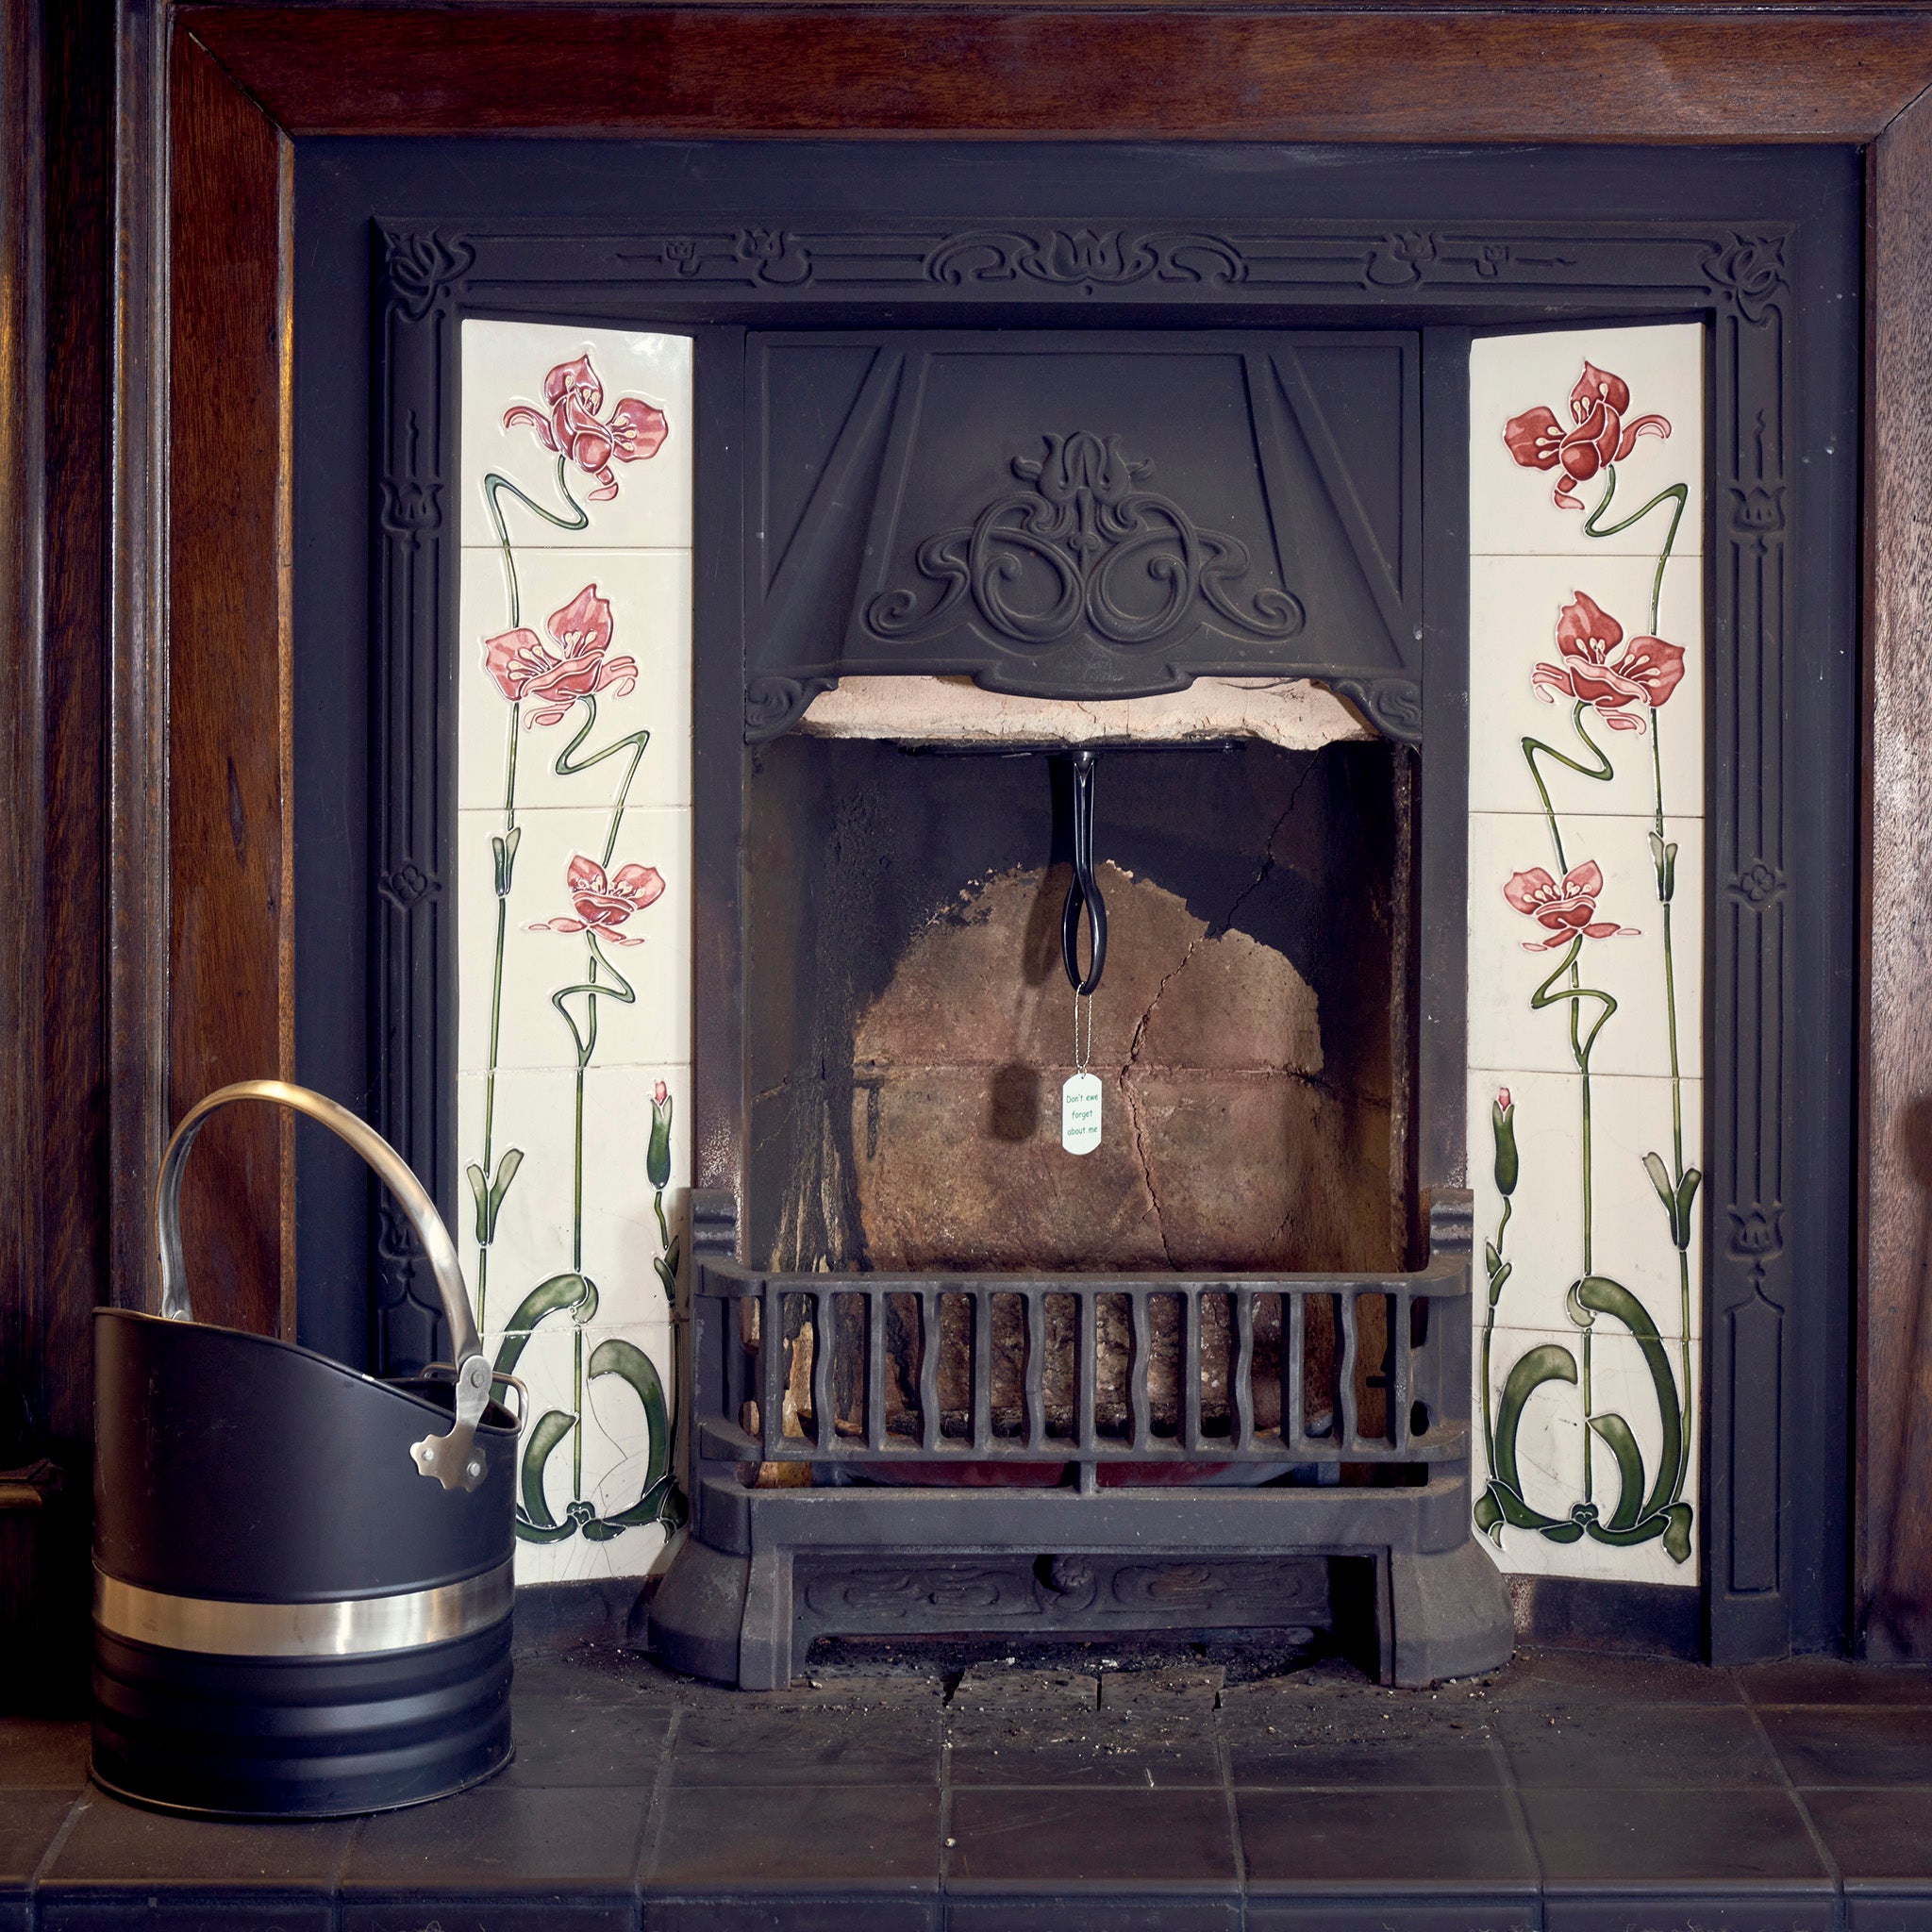 A Chimney Sheep in a fireplace. A more effective alternative to a Chimney Balloon or a Chimella